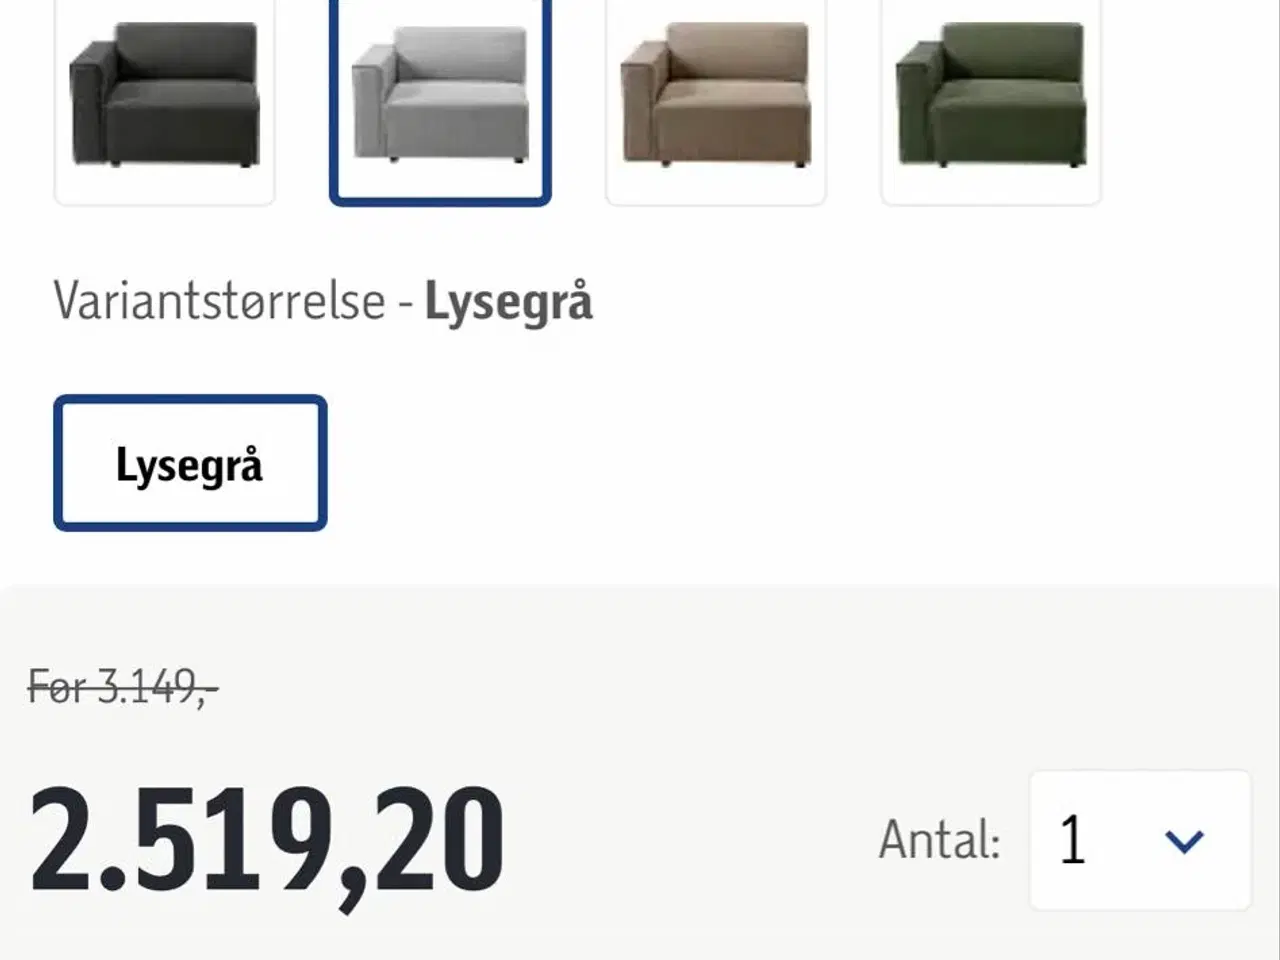 Billede 1 - Sofa modul opbygget, to pers, med puf.